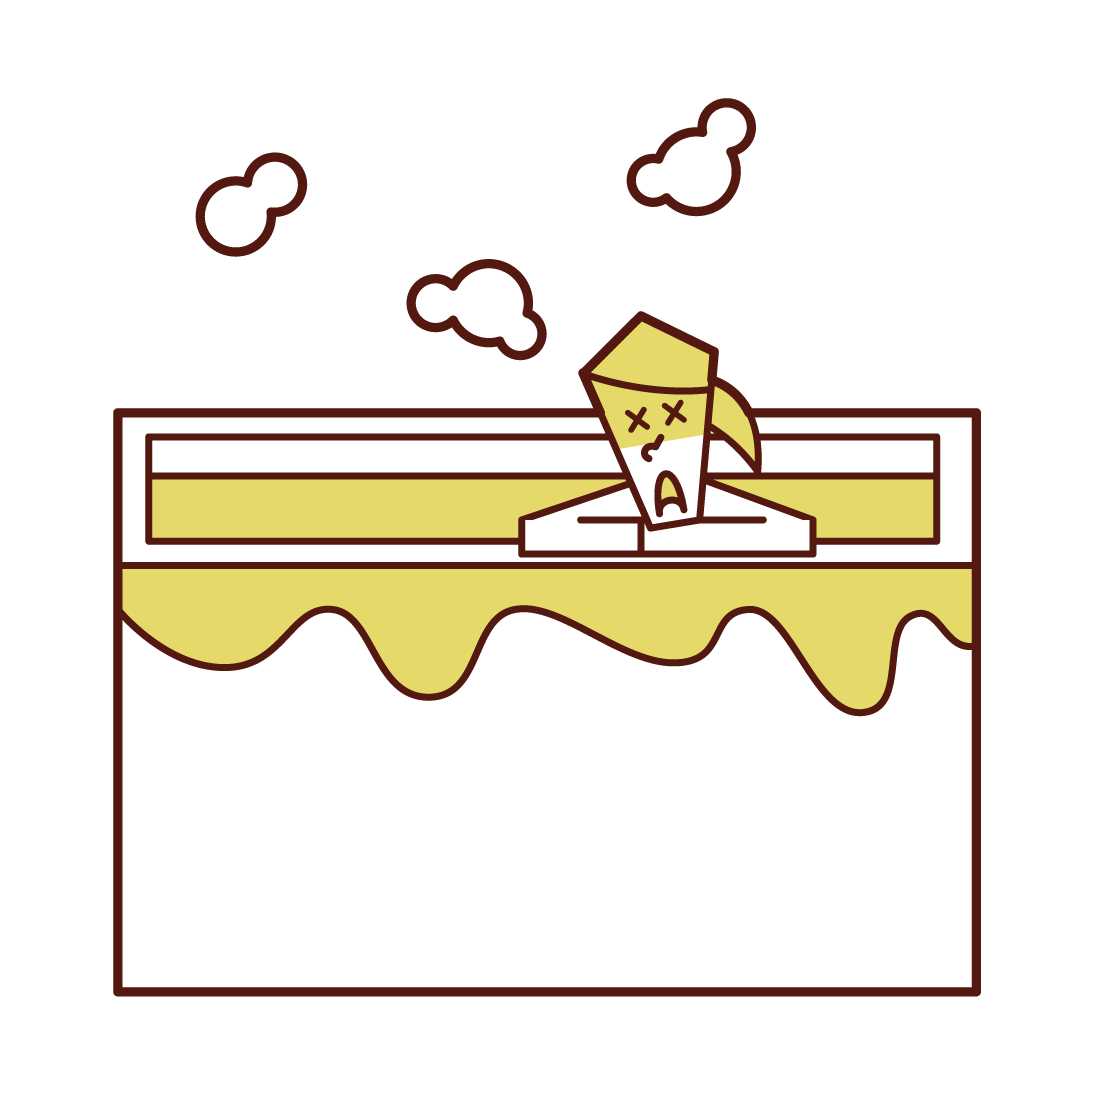 Illustration of a woman who can blur in the bath